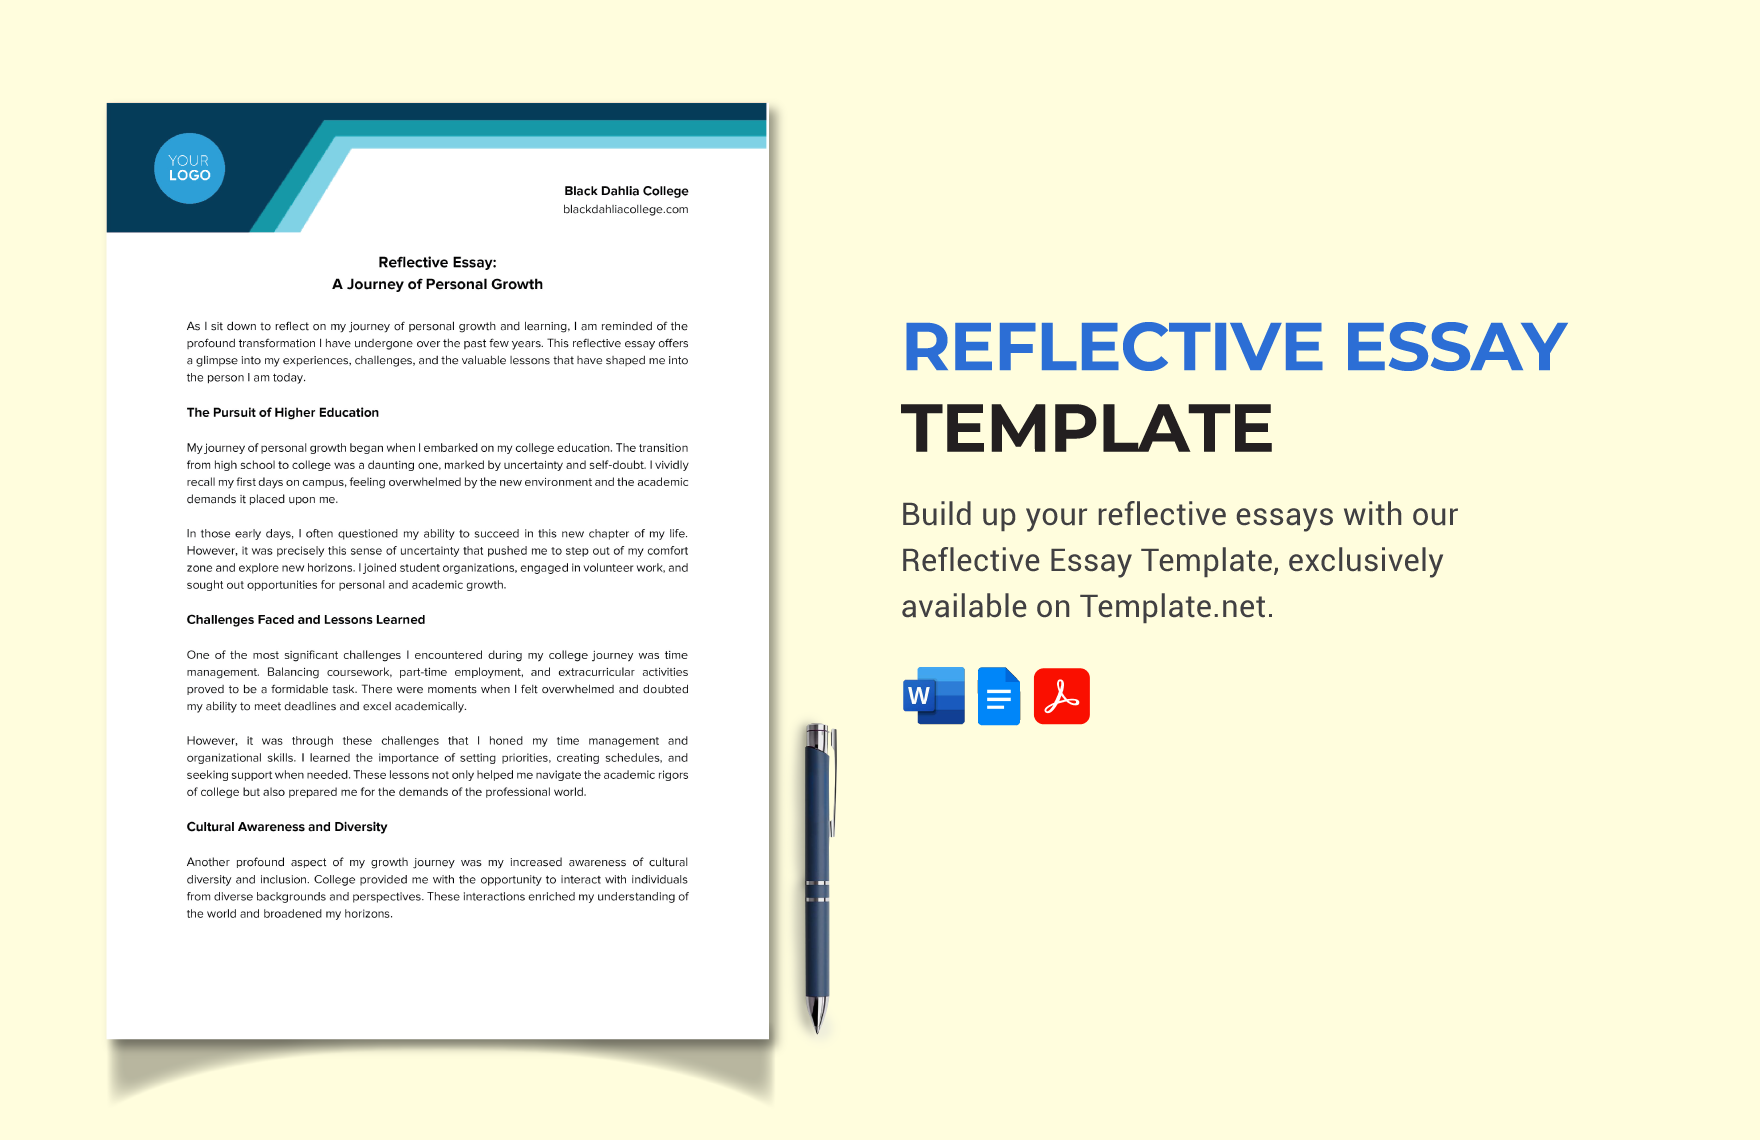 Reflective Essay Template in Word, Google Docs, PDF